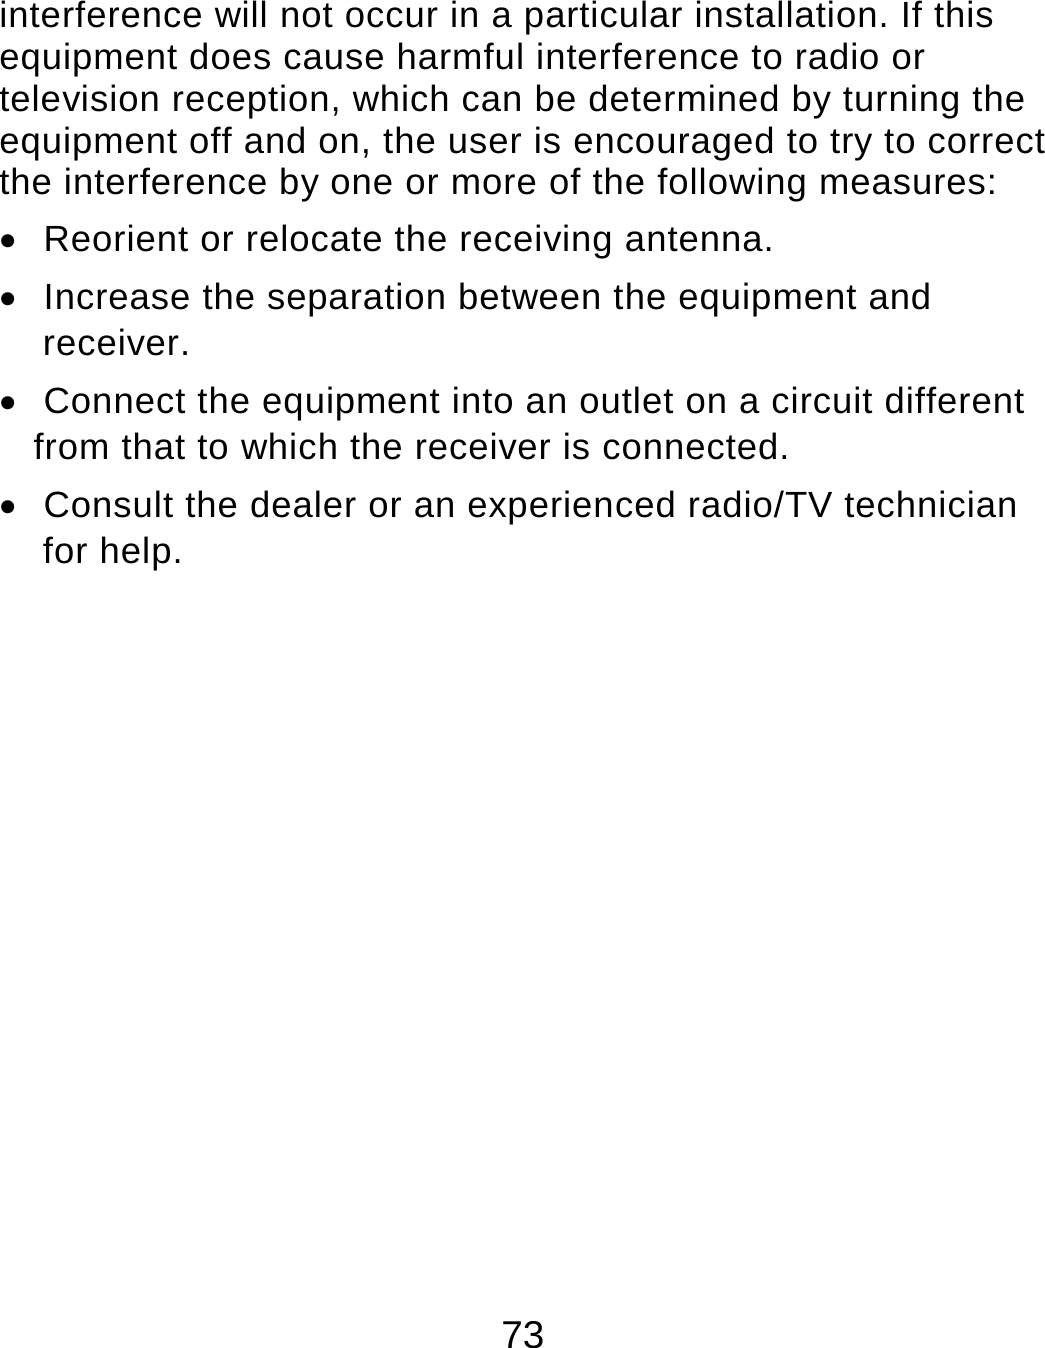 73 interference will not occur in a particular installation. If this equipment does cause harmful interference to radio or television reception, which can be determined by turning the equipment off and on, the user is encouraged to try to correct the interference by one or more of the following measures:   Reorient or relocate the receiving antenna.   Increase the separation between the equipment and receiver.   Connect the equipment into an outlet on a circuit different from that to which the receiver is connected.   Consult the dealer or an experienced radio/TV technician for help.    